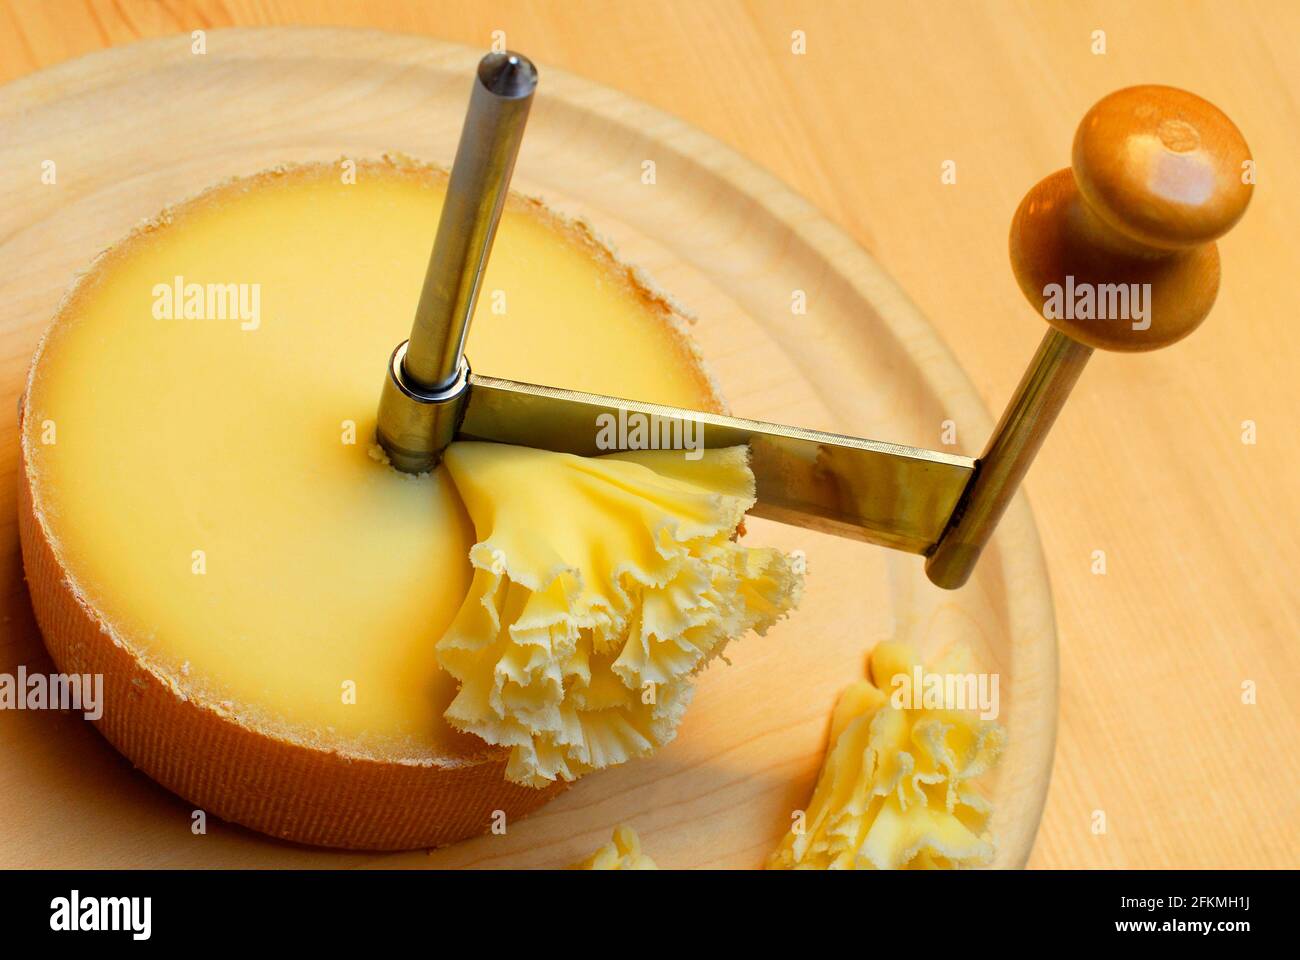 Shaving Tete De Moine Cheese Using Girolle Knife. Variety Of Swiss  Semi-hard Cheese Made From Unpasteurized Cows Milk, The Name Monks Head  Stock Photo, Picture and Royalty Free Image. Image 166728765.